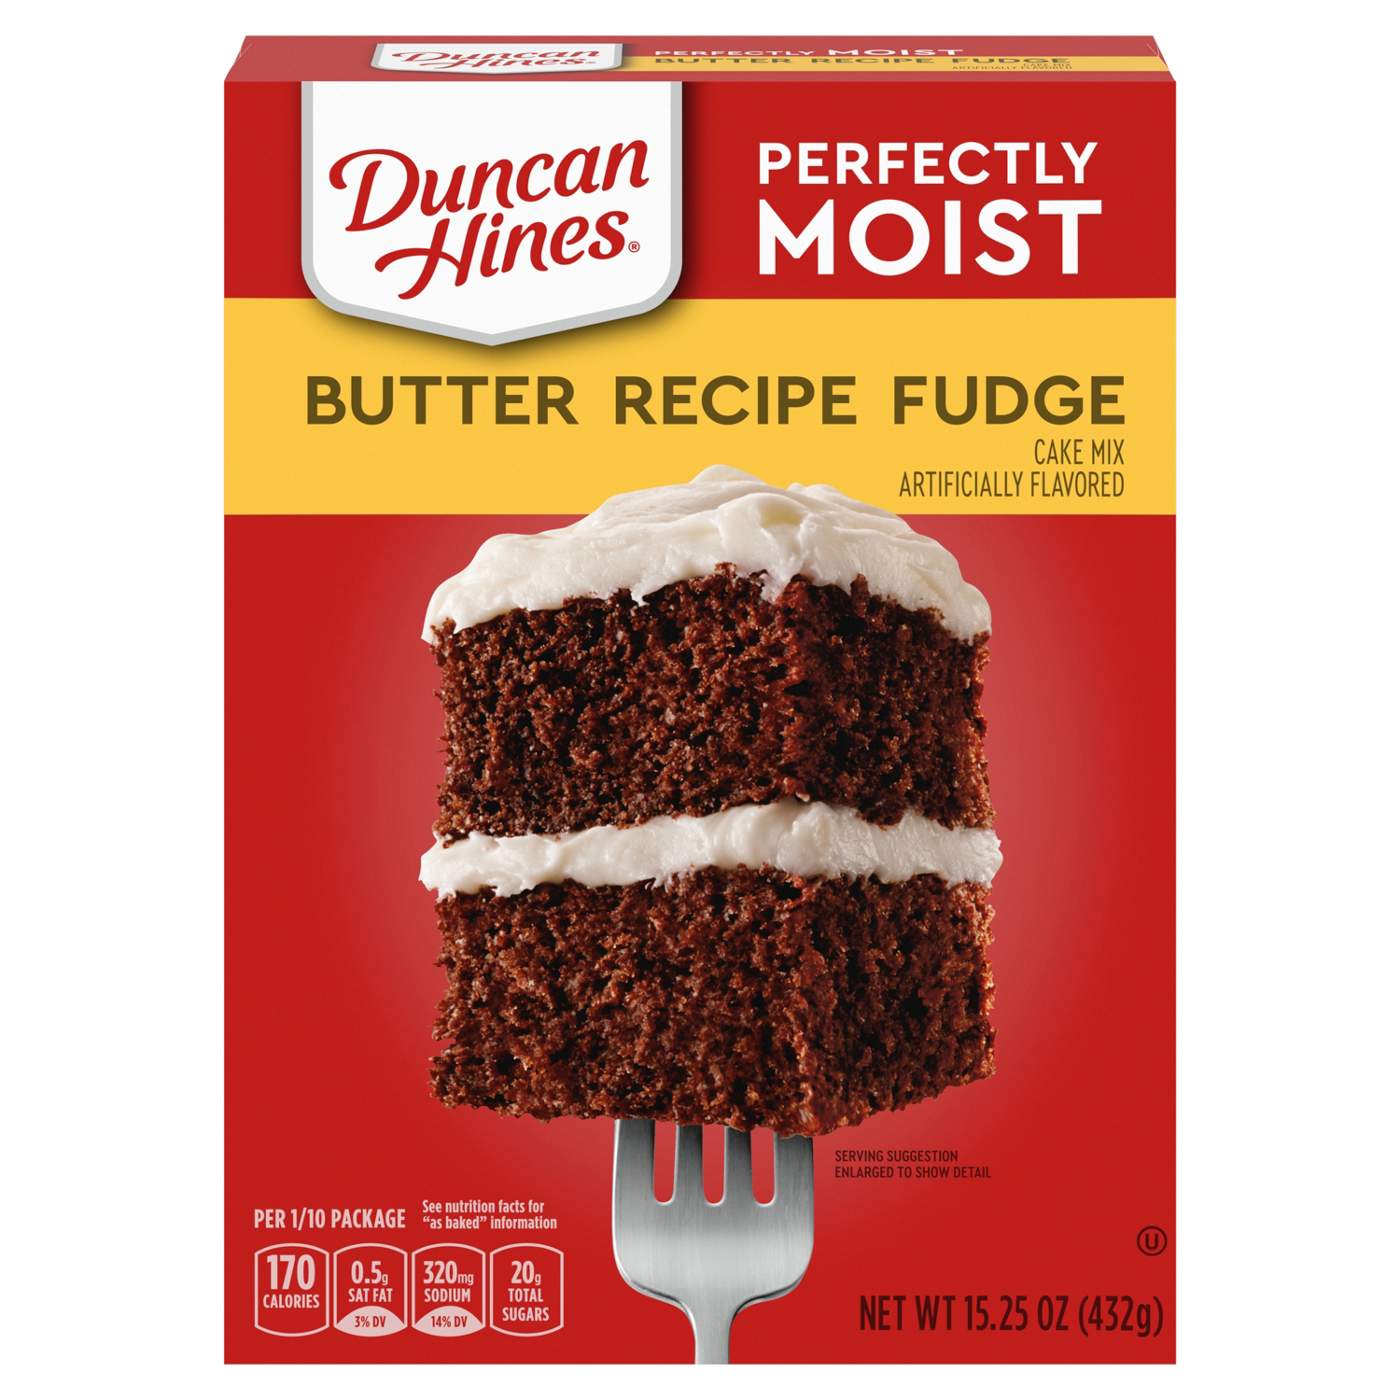 Duncan Hines Perfectly Moist Butter Recipe Fudge Cake Mix; image 1 of 7